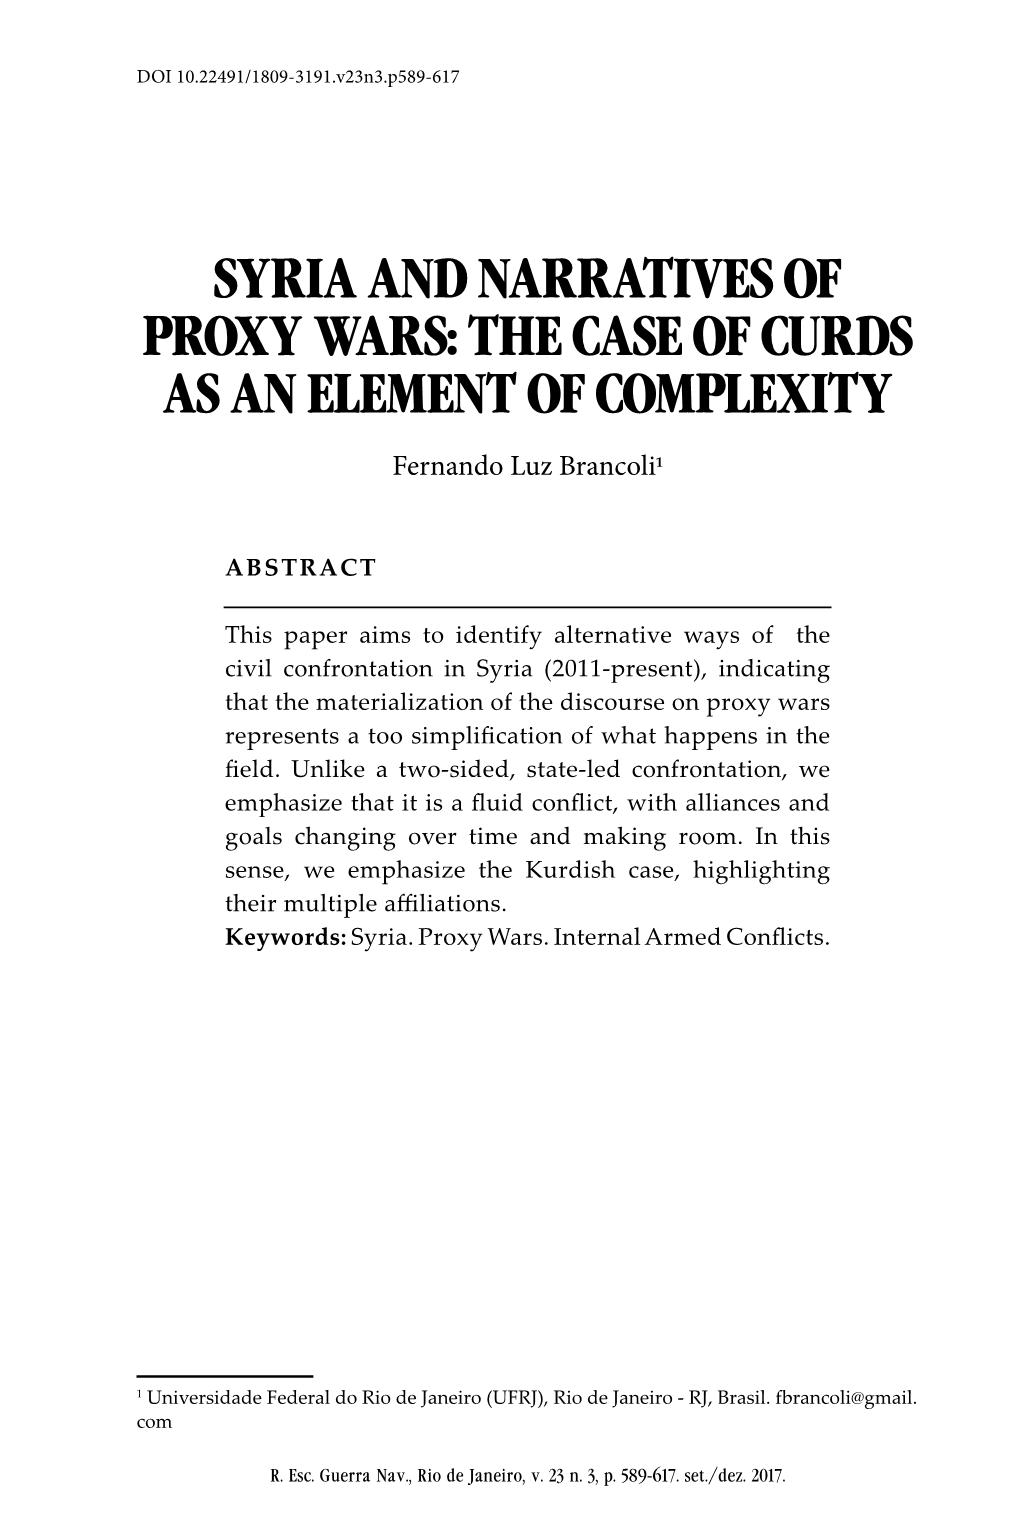 Syria and Narratives of Proxy Wars: the Case of Curds As an Element of Complexity